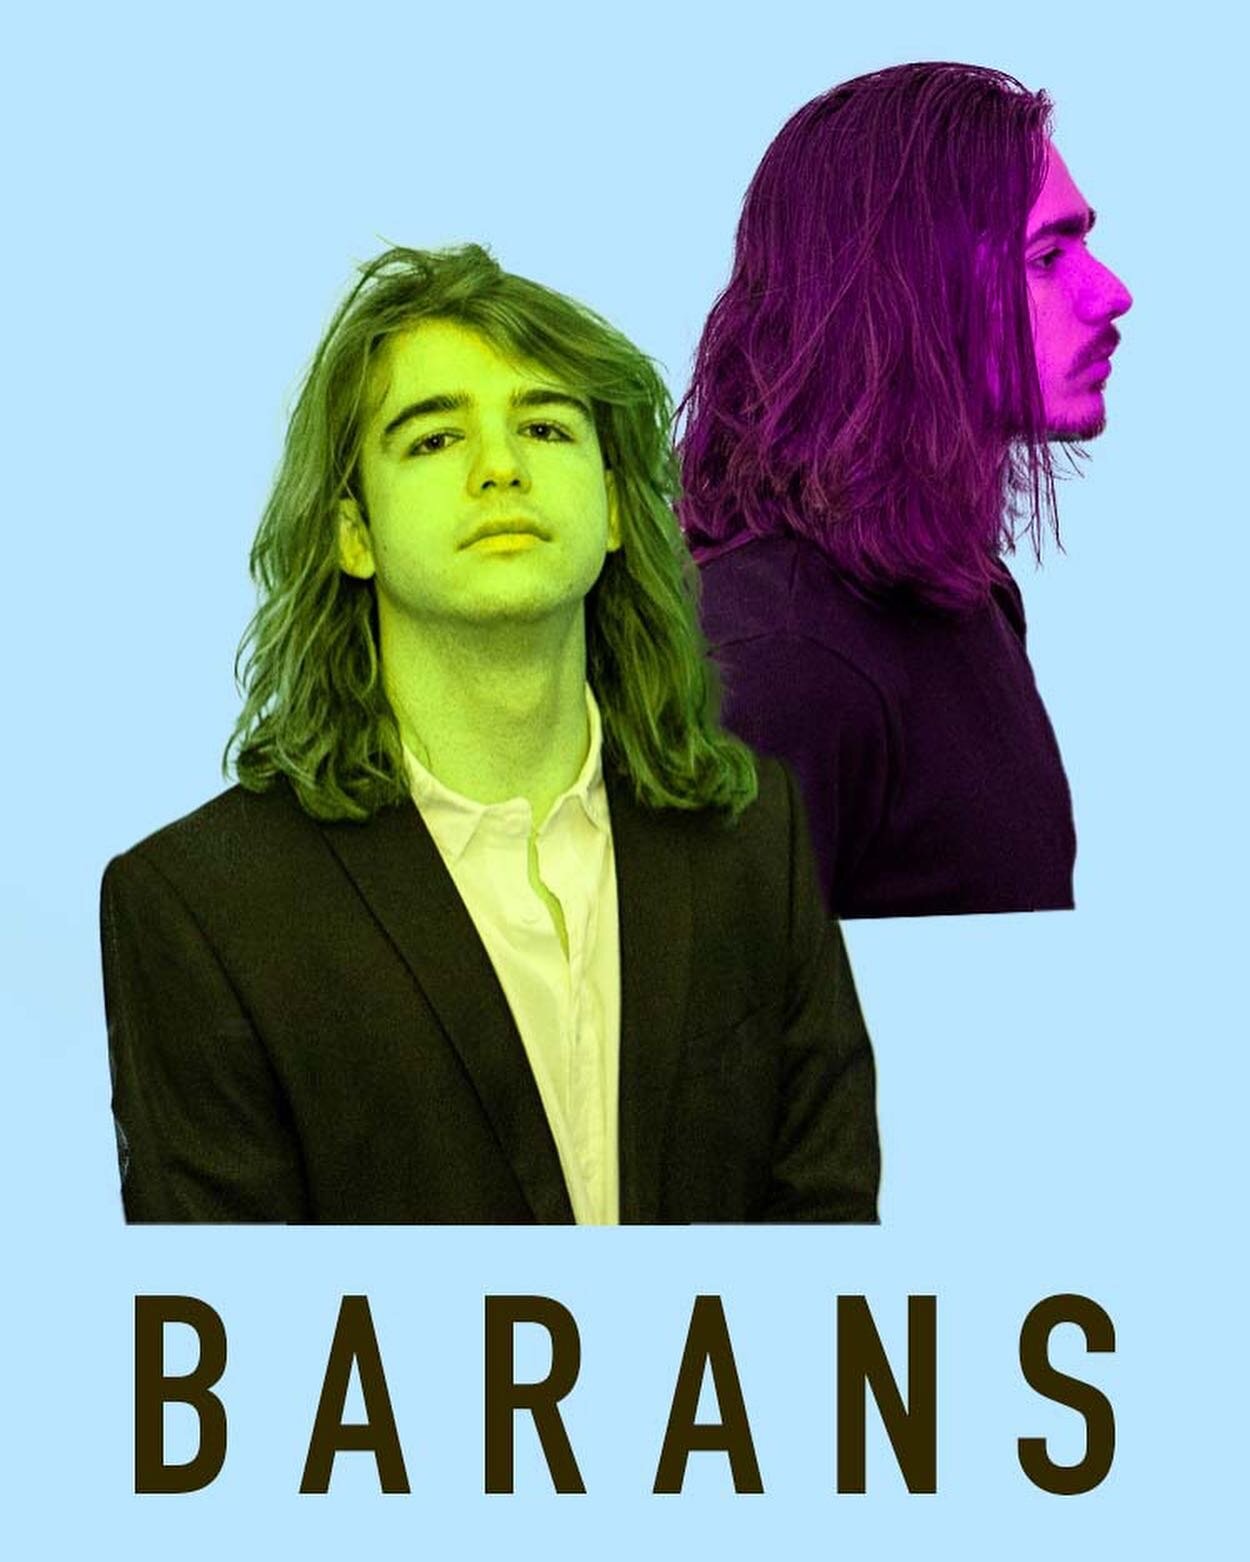 Edited with some old pics for @baransofficial